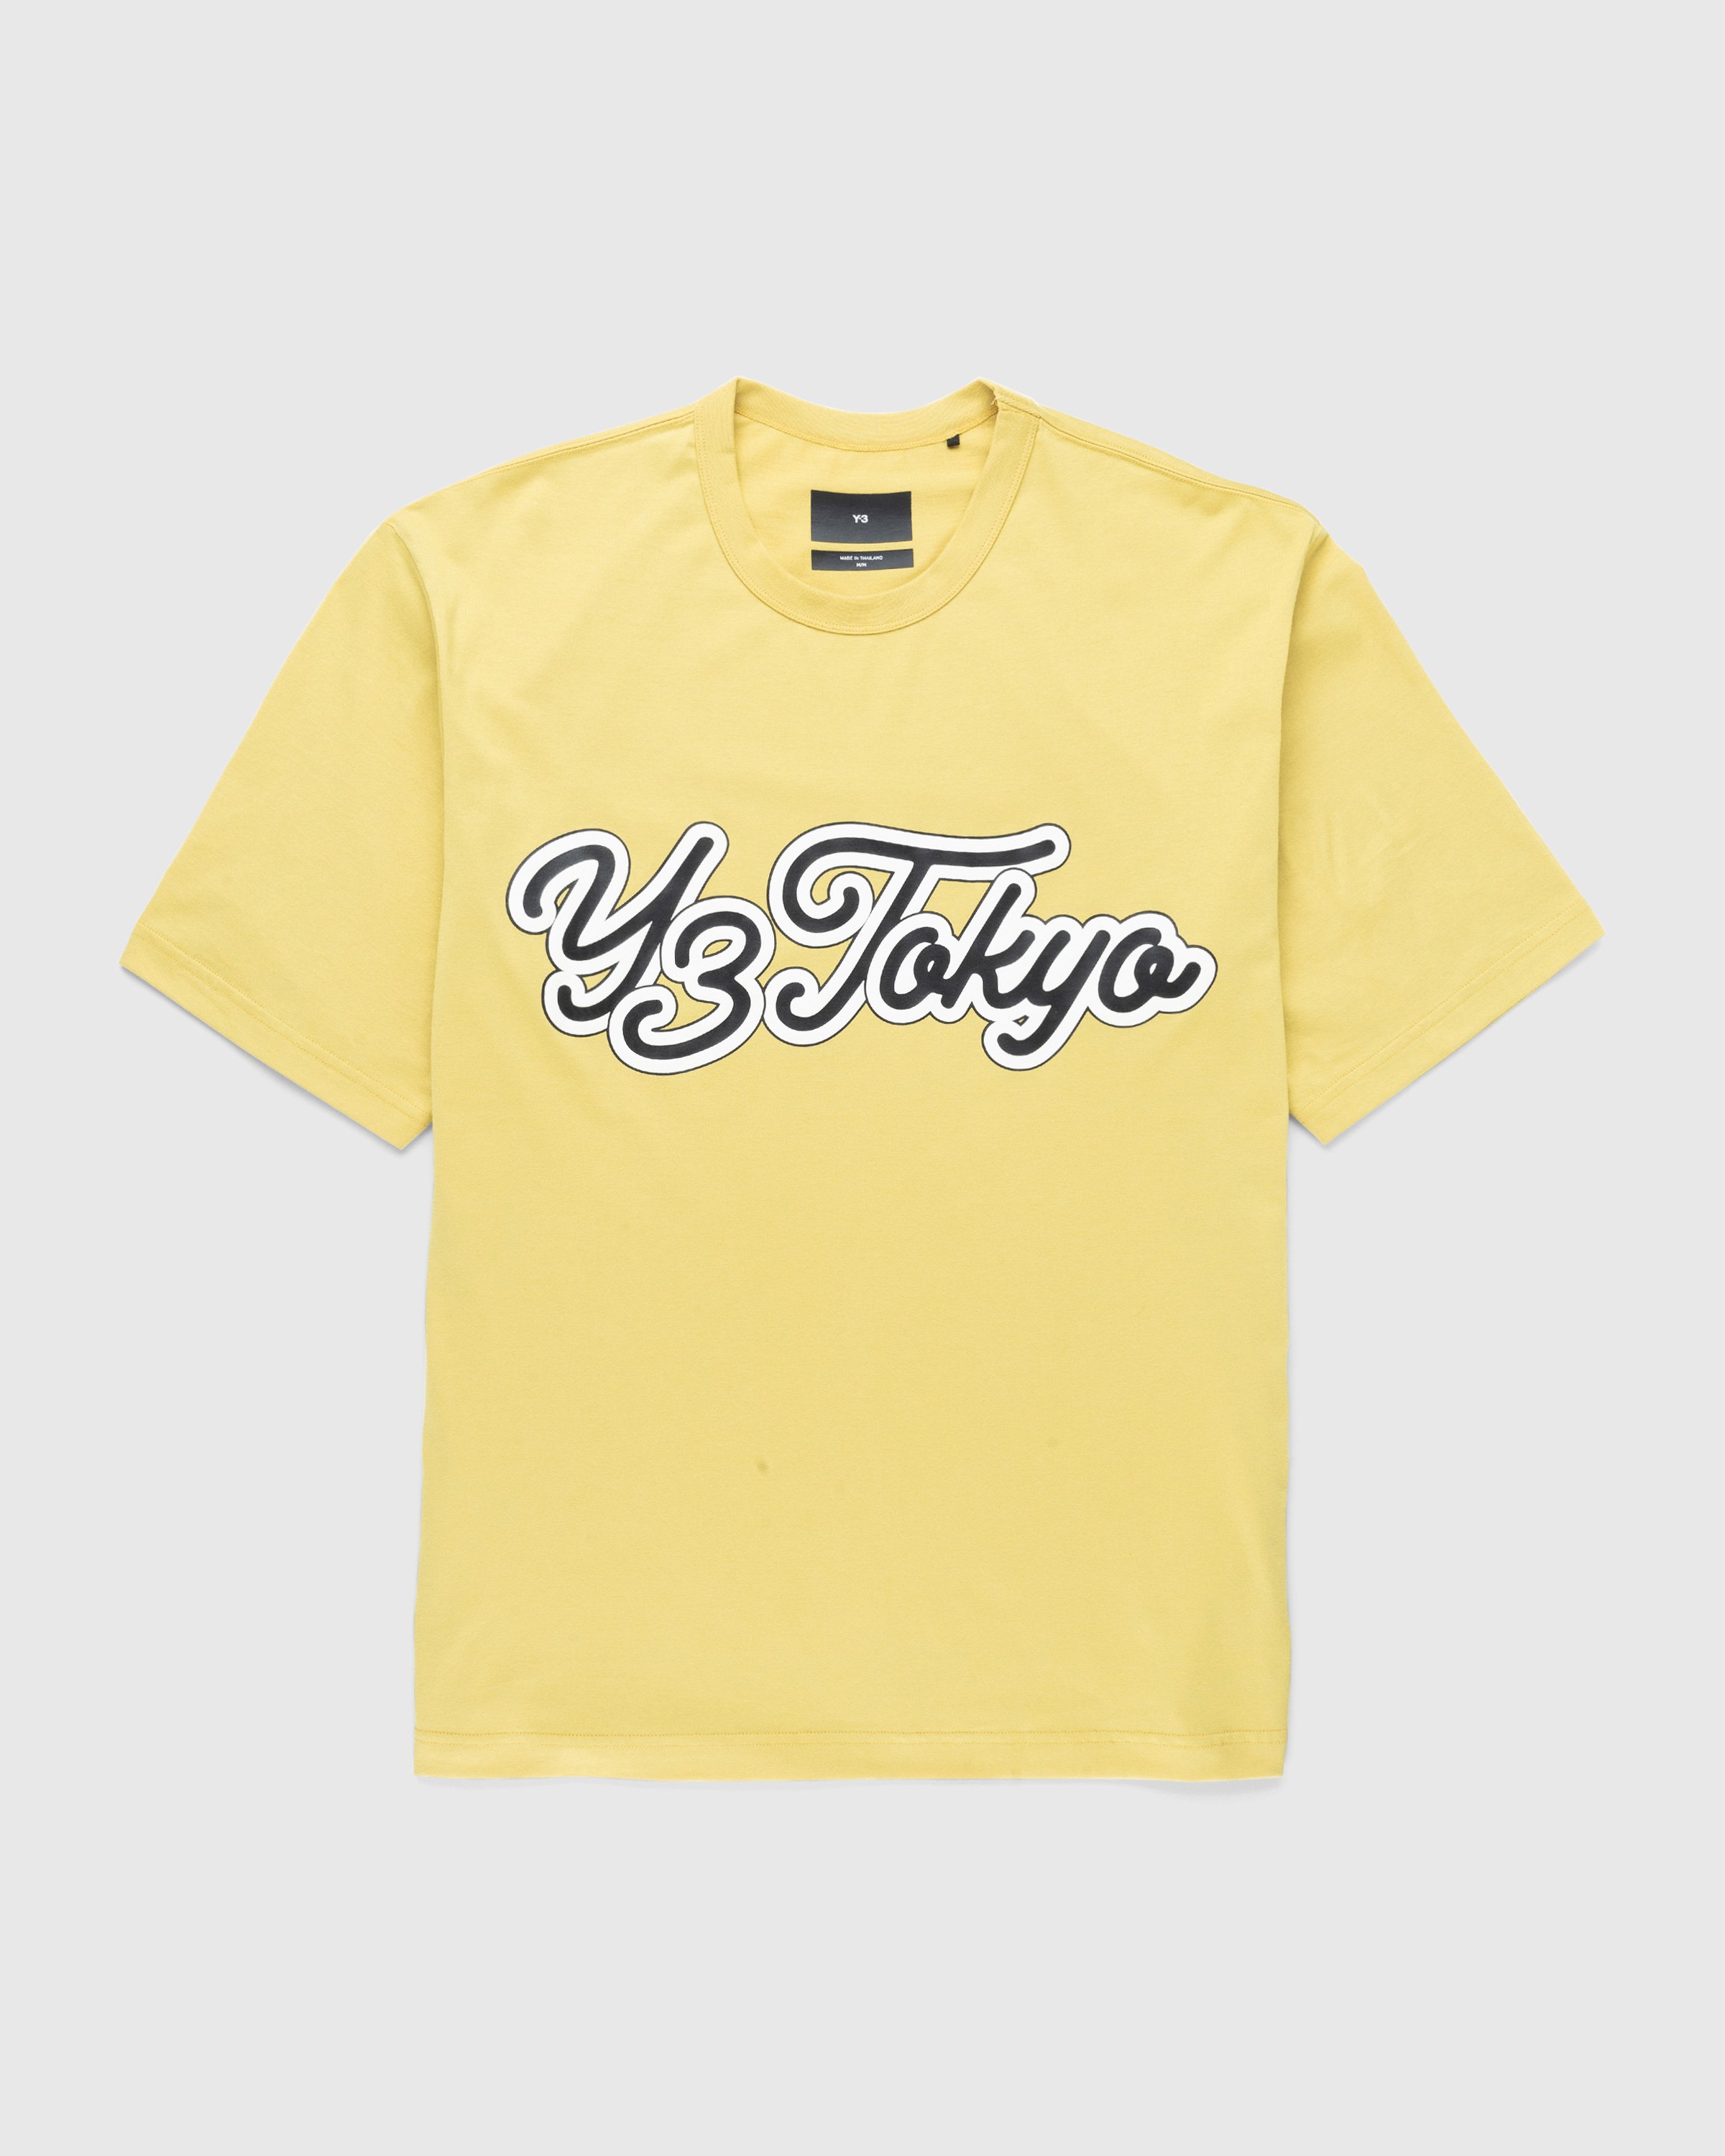 Y-3 - Tokyo T-Shirt Blanch Yellow - Clothing - Yellow - Image 1